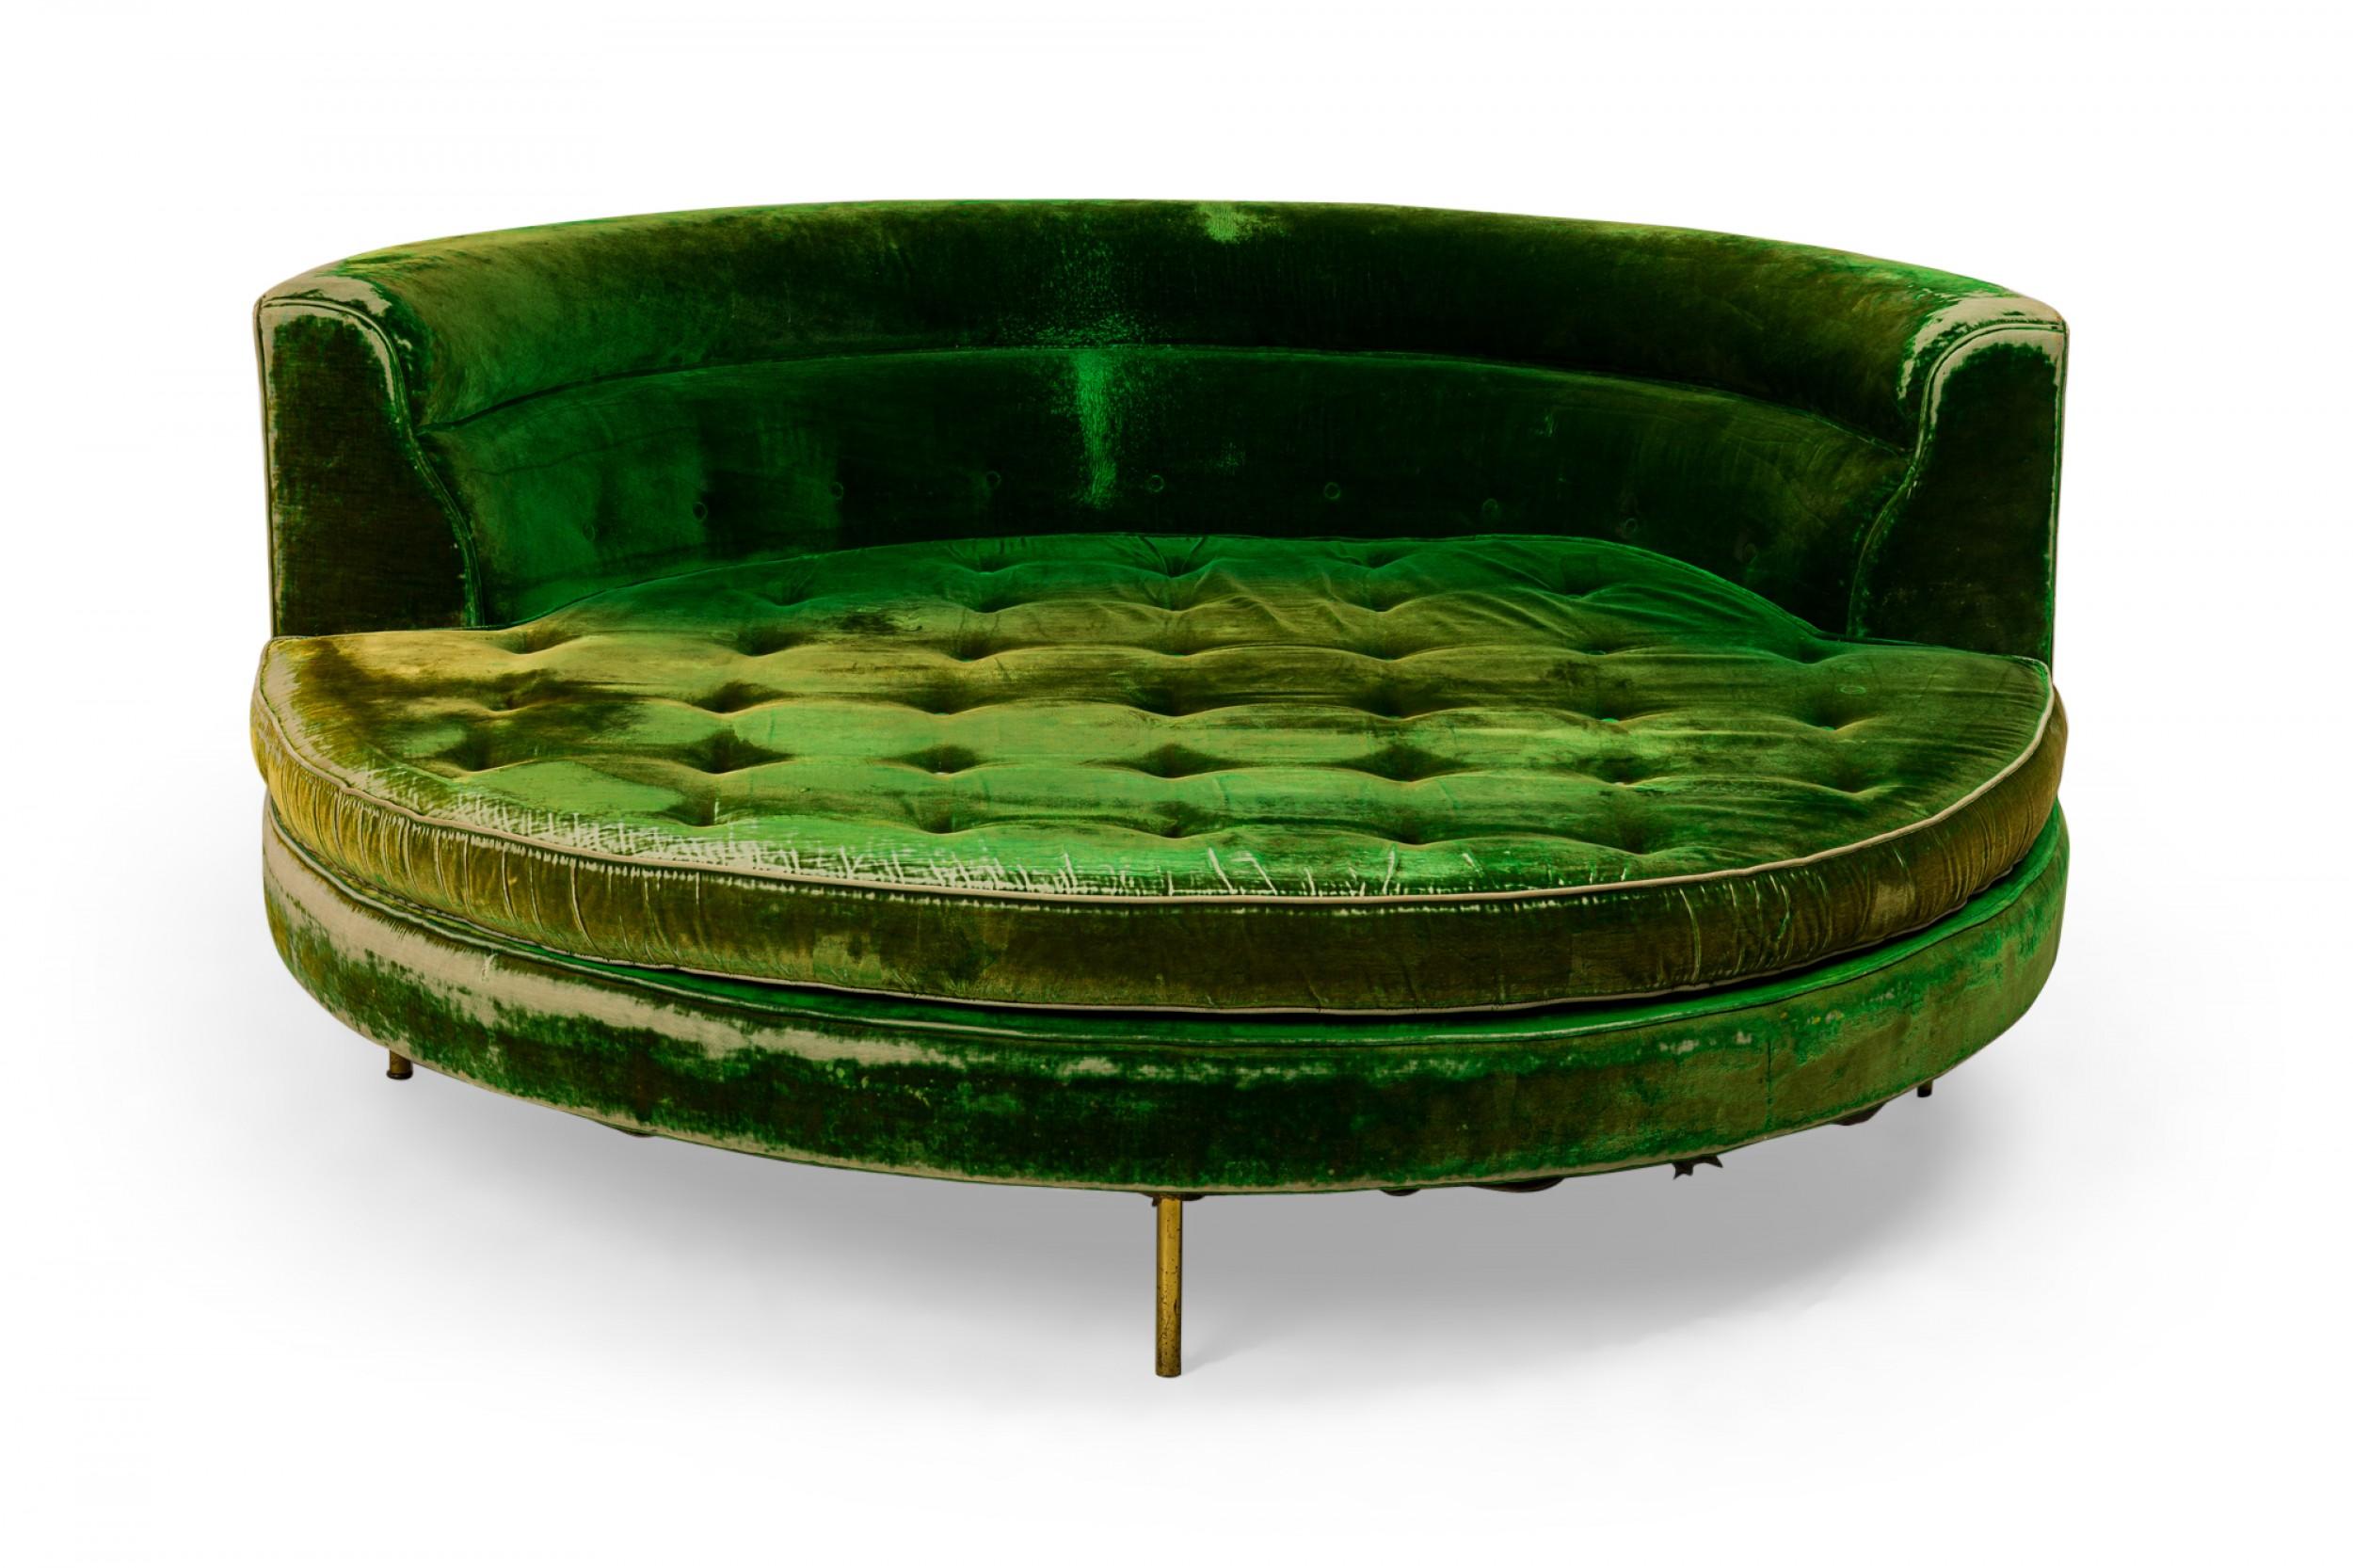 American Mid-Century large round sofa with a low curved partial backrest and emerald green velvet upholstery with a button tufted removable seat cushion, resting on five short brass dowel legs. (HARVEY PROBBER)
